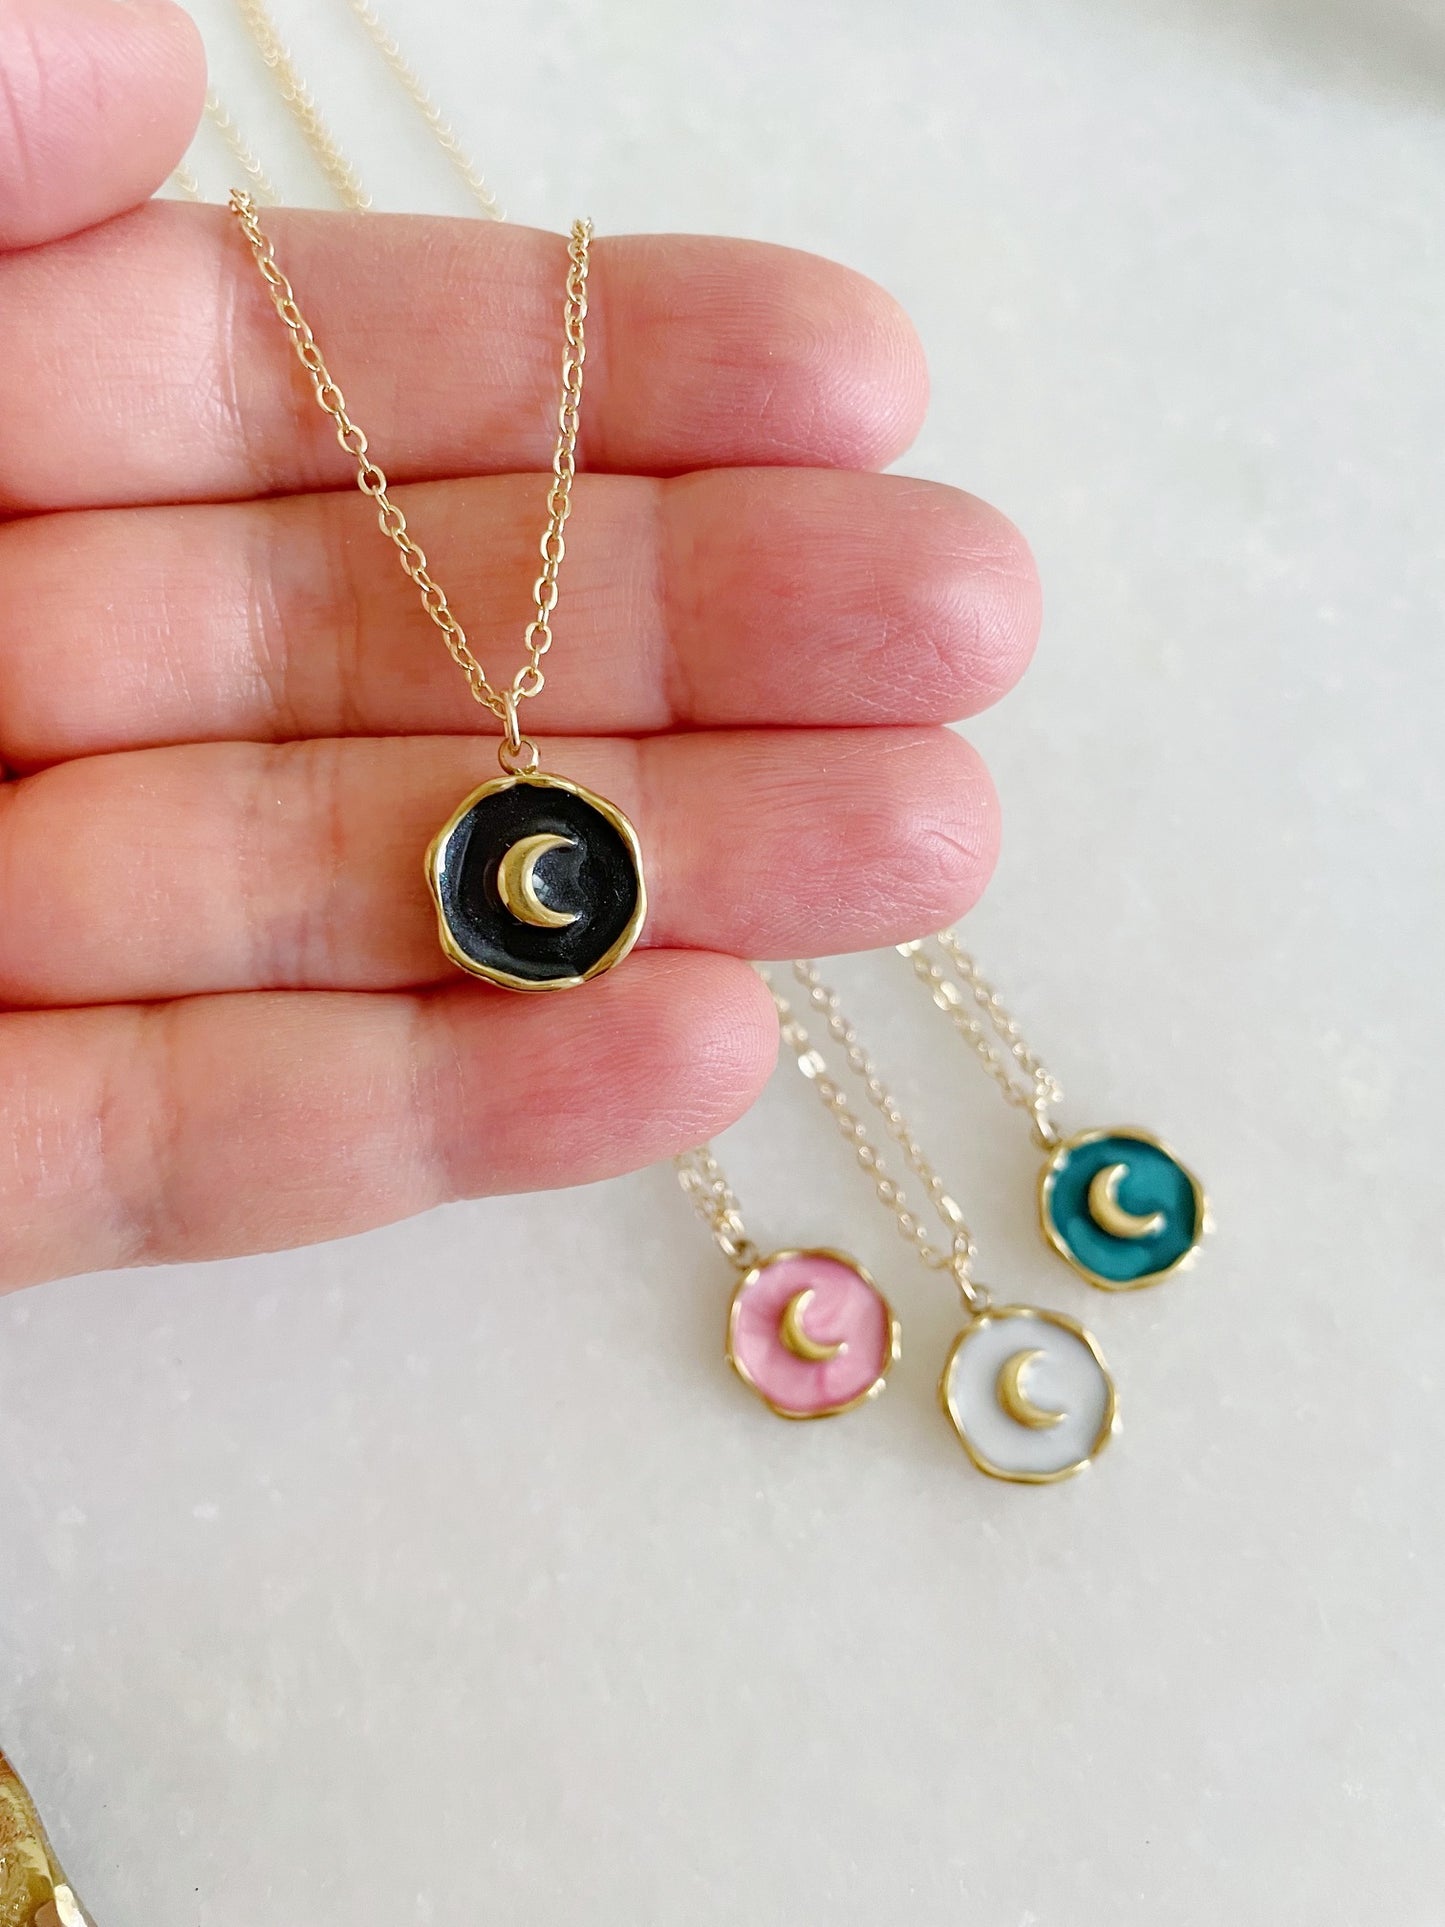 Gold Moon Necklace, Moon Jewelry, Crescent Moon Pendant